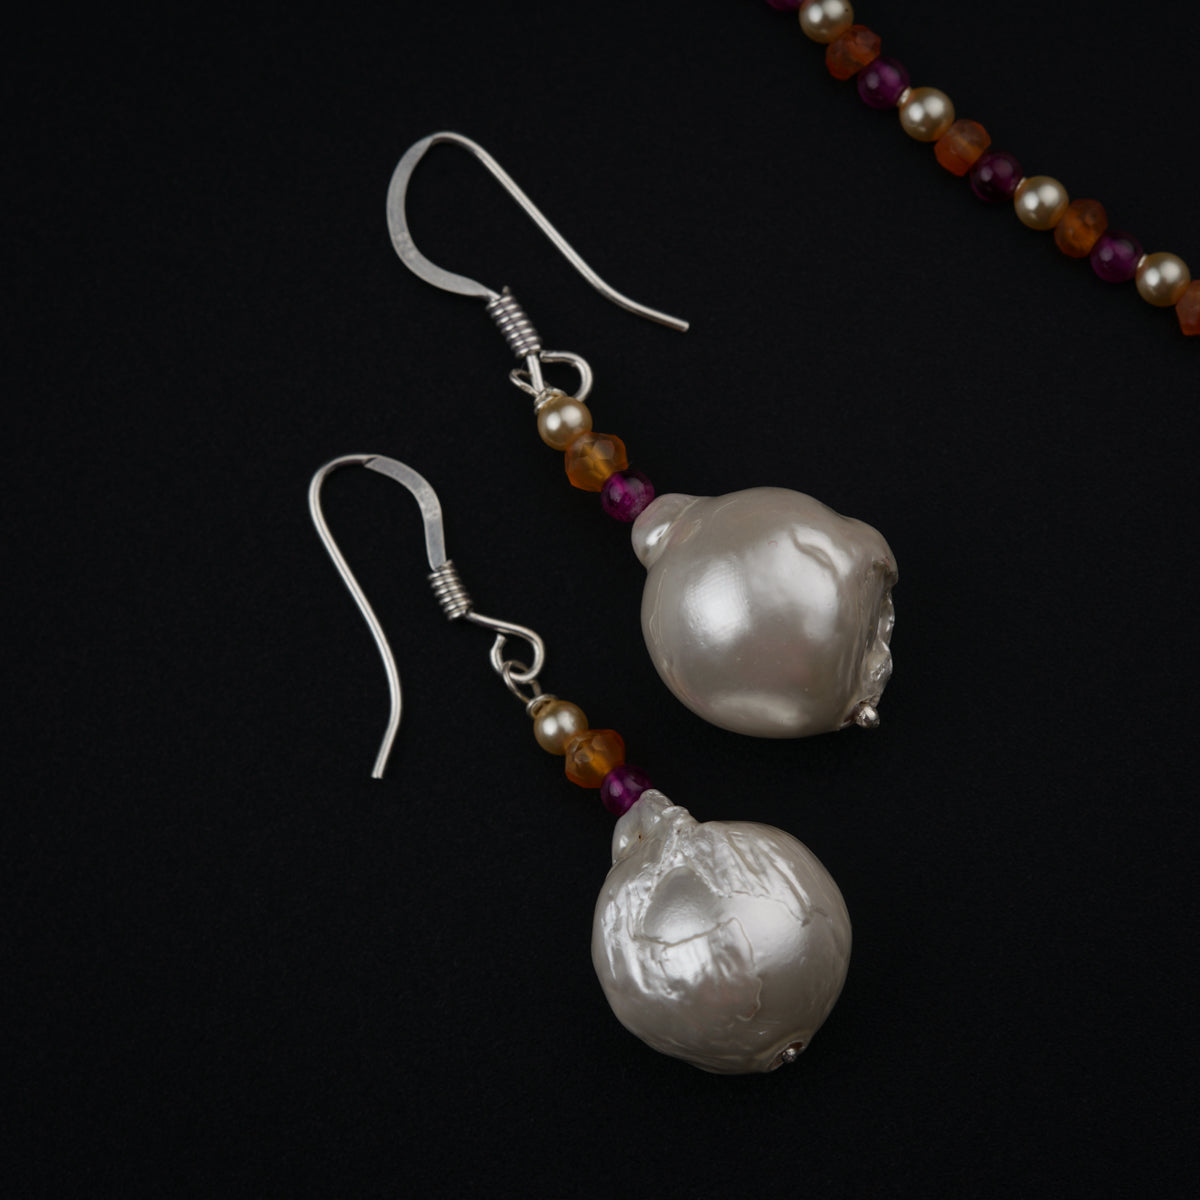 Zen Vibes Set: High Quality Pearls, Rubies and Carnelians